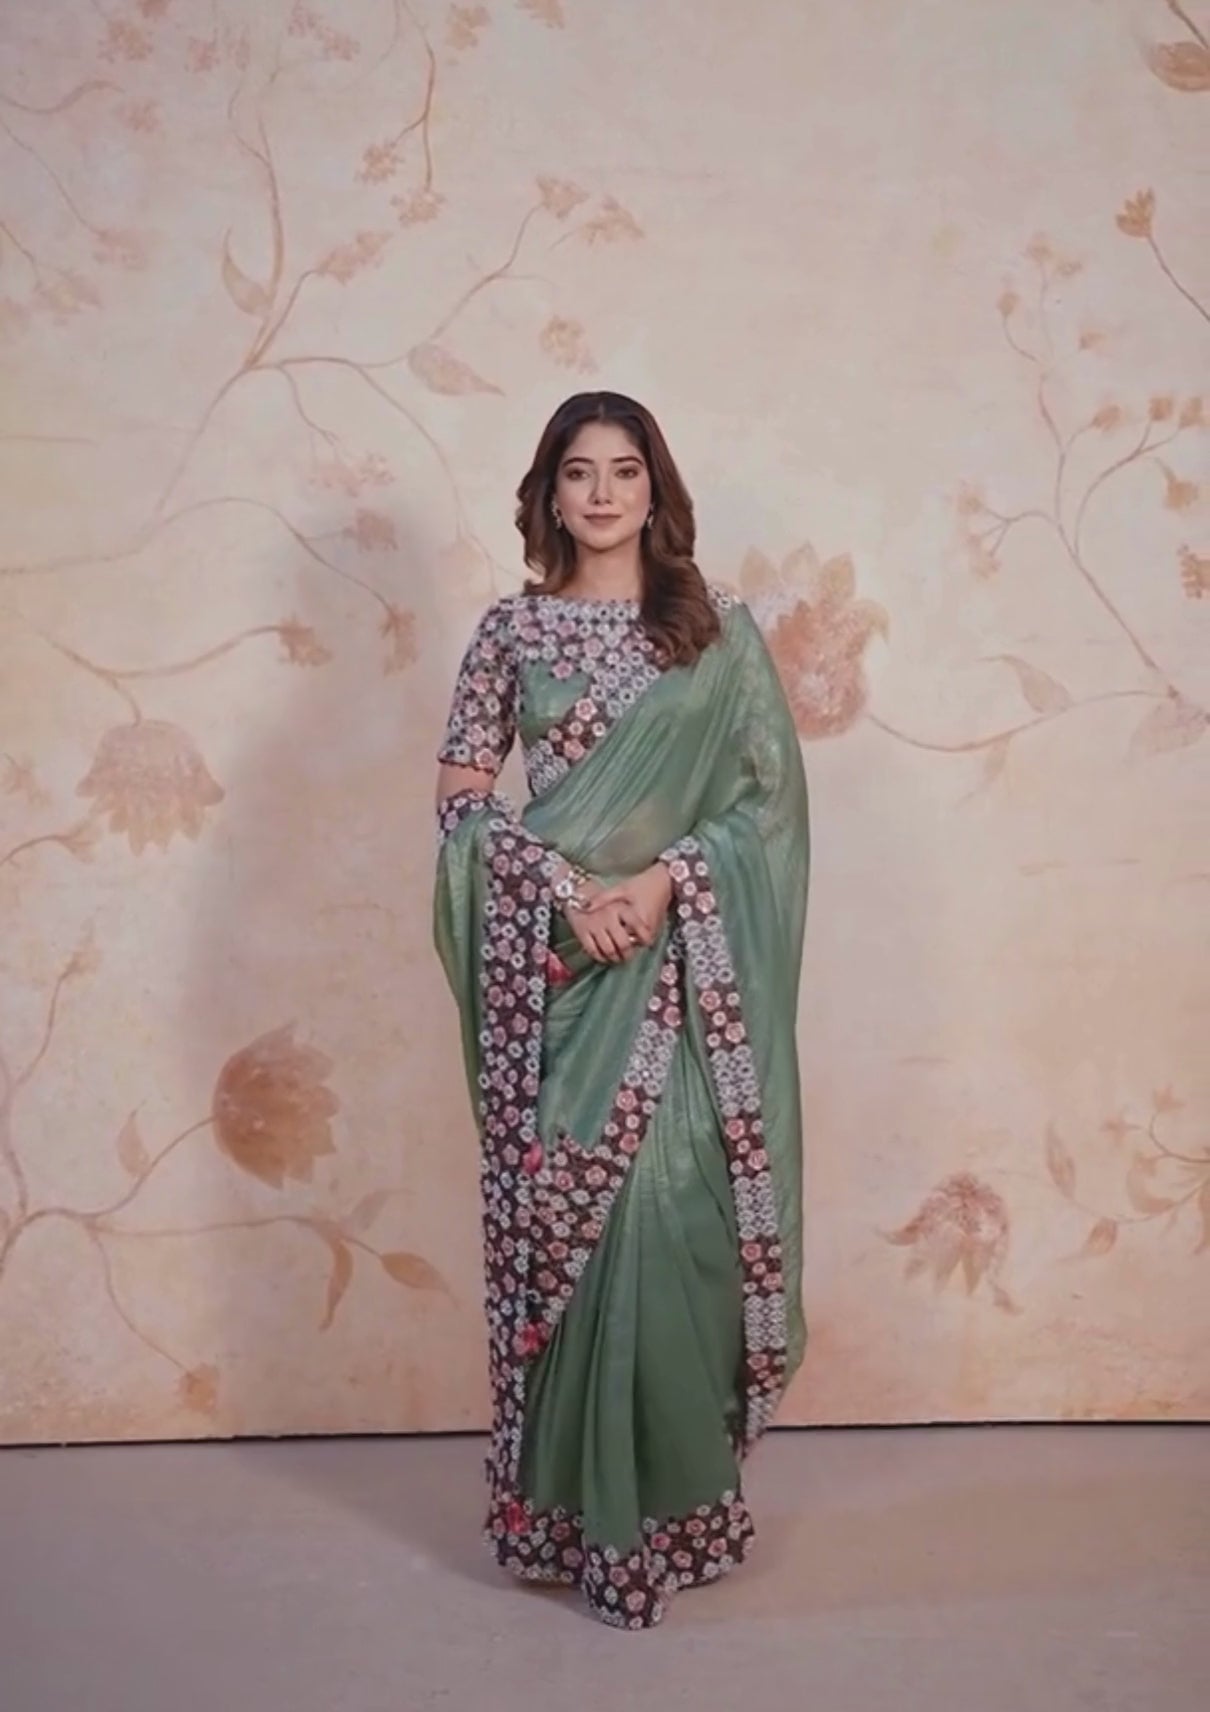 Green and brown printed silk saree with intricate floral patterns.